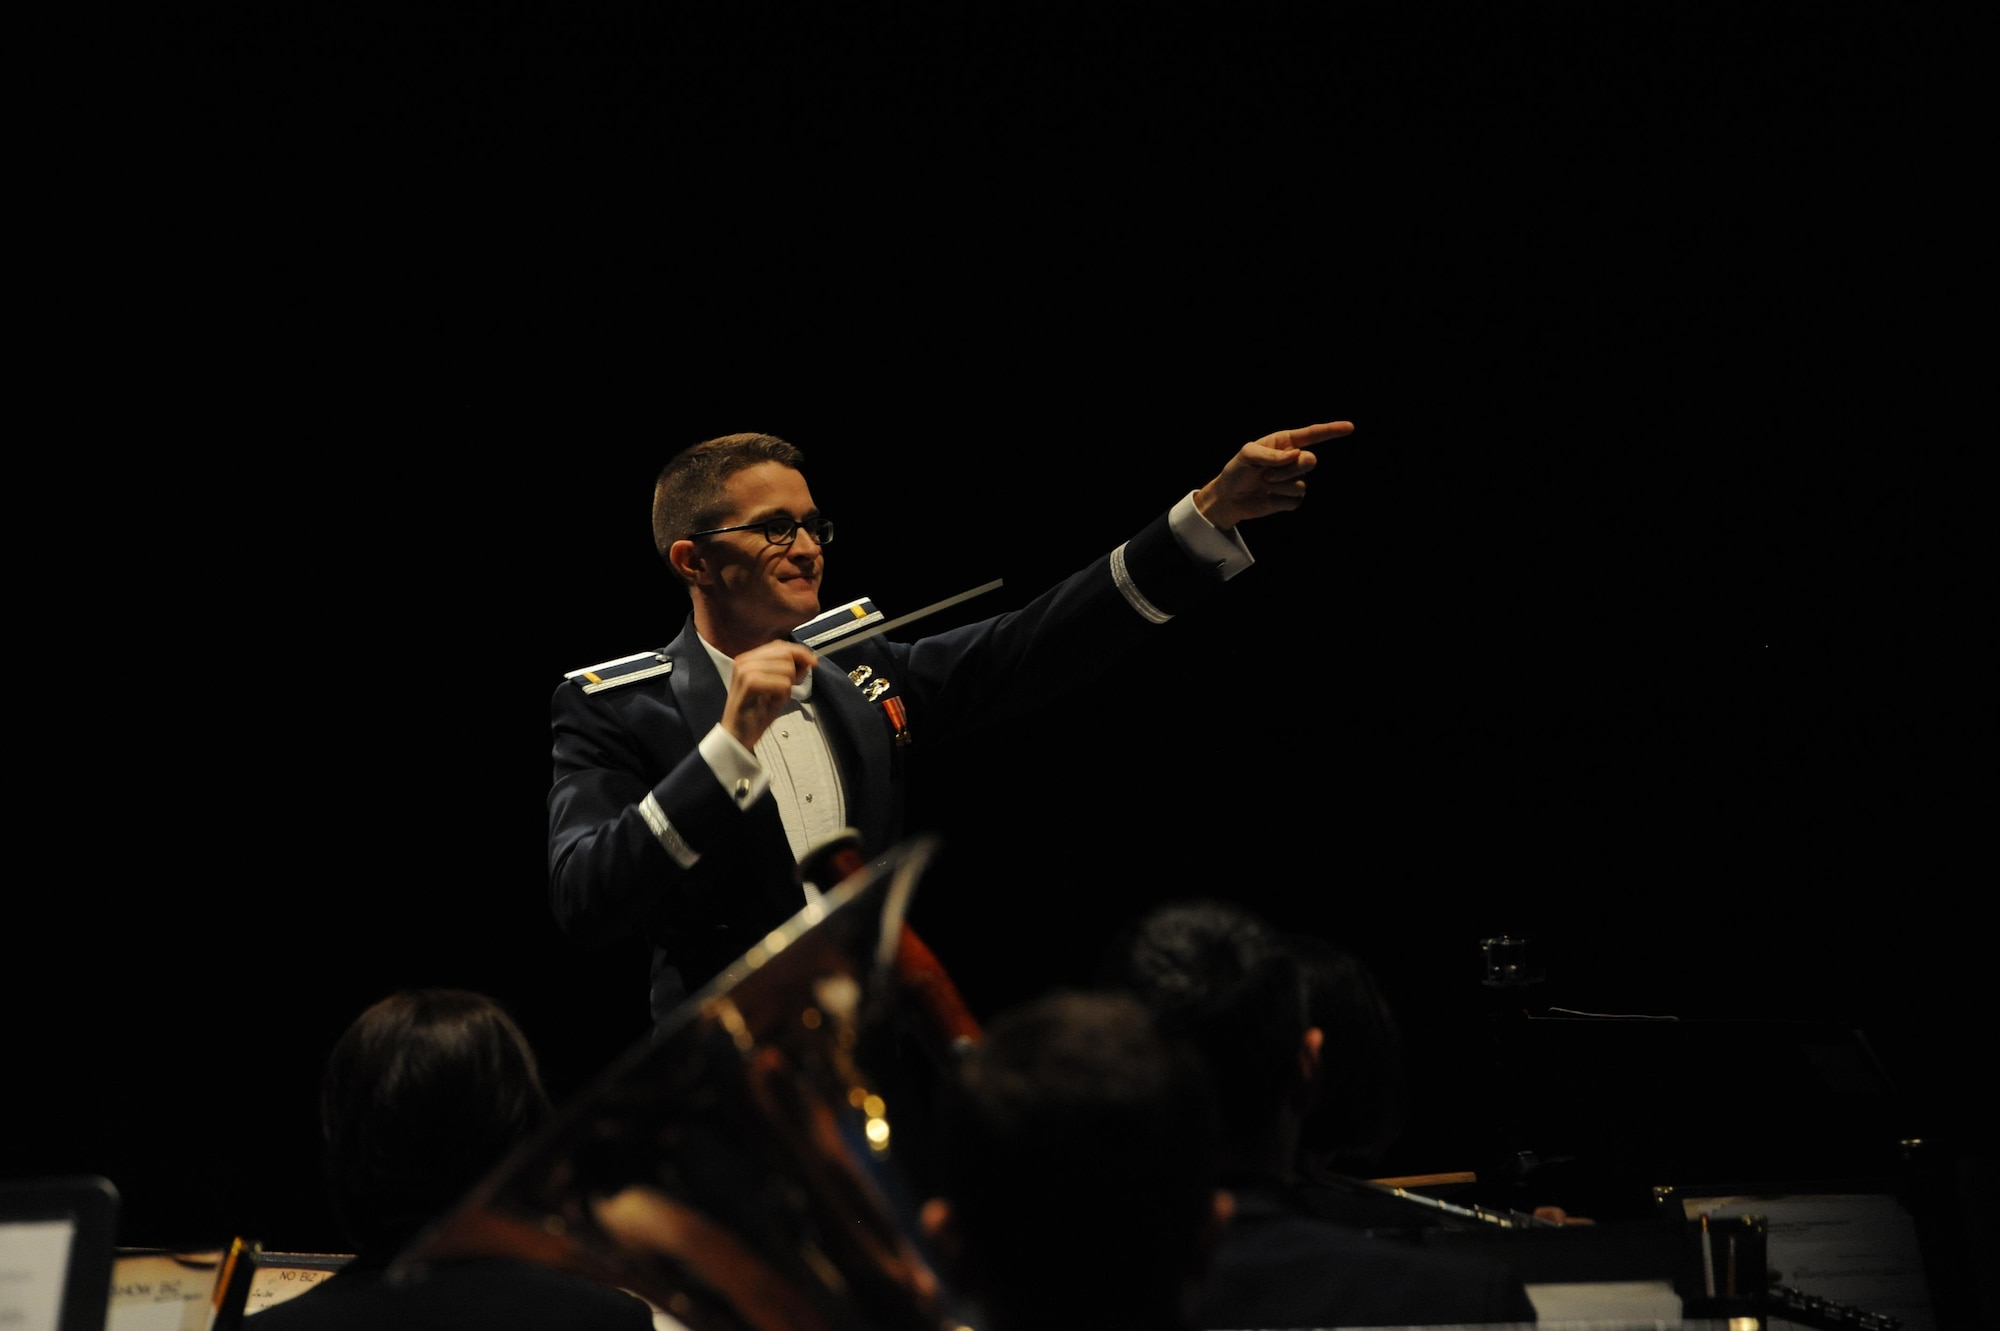 2nd Lt. Philip Emery, U.S. Air Force Heritage of America Band flight commander and associate conductor, conducts during a USAF HOAB 75th Anniversary Band Concert at the Ferguson Center for the Arts in Newport News, Va., Oct. 1, 2016. Since its creation, the band has represented the Air Force at musical and military events. This concert represented the band’s 75 years of heritage since it was first established in 1941. (U.S. Air Force photo by Staff Sgt. Nick Wilson)